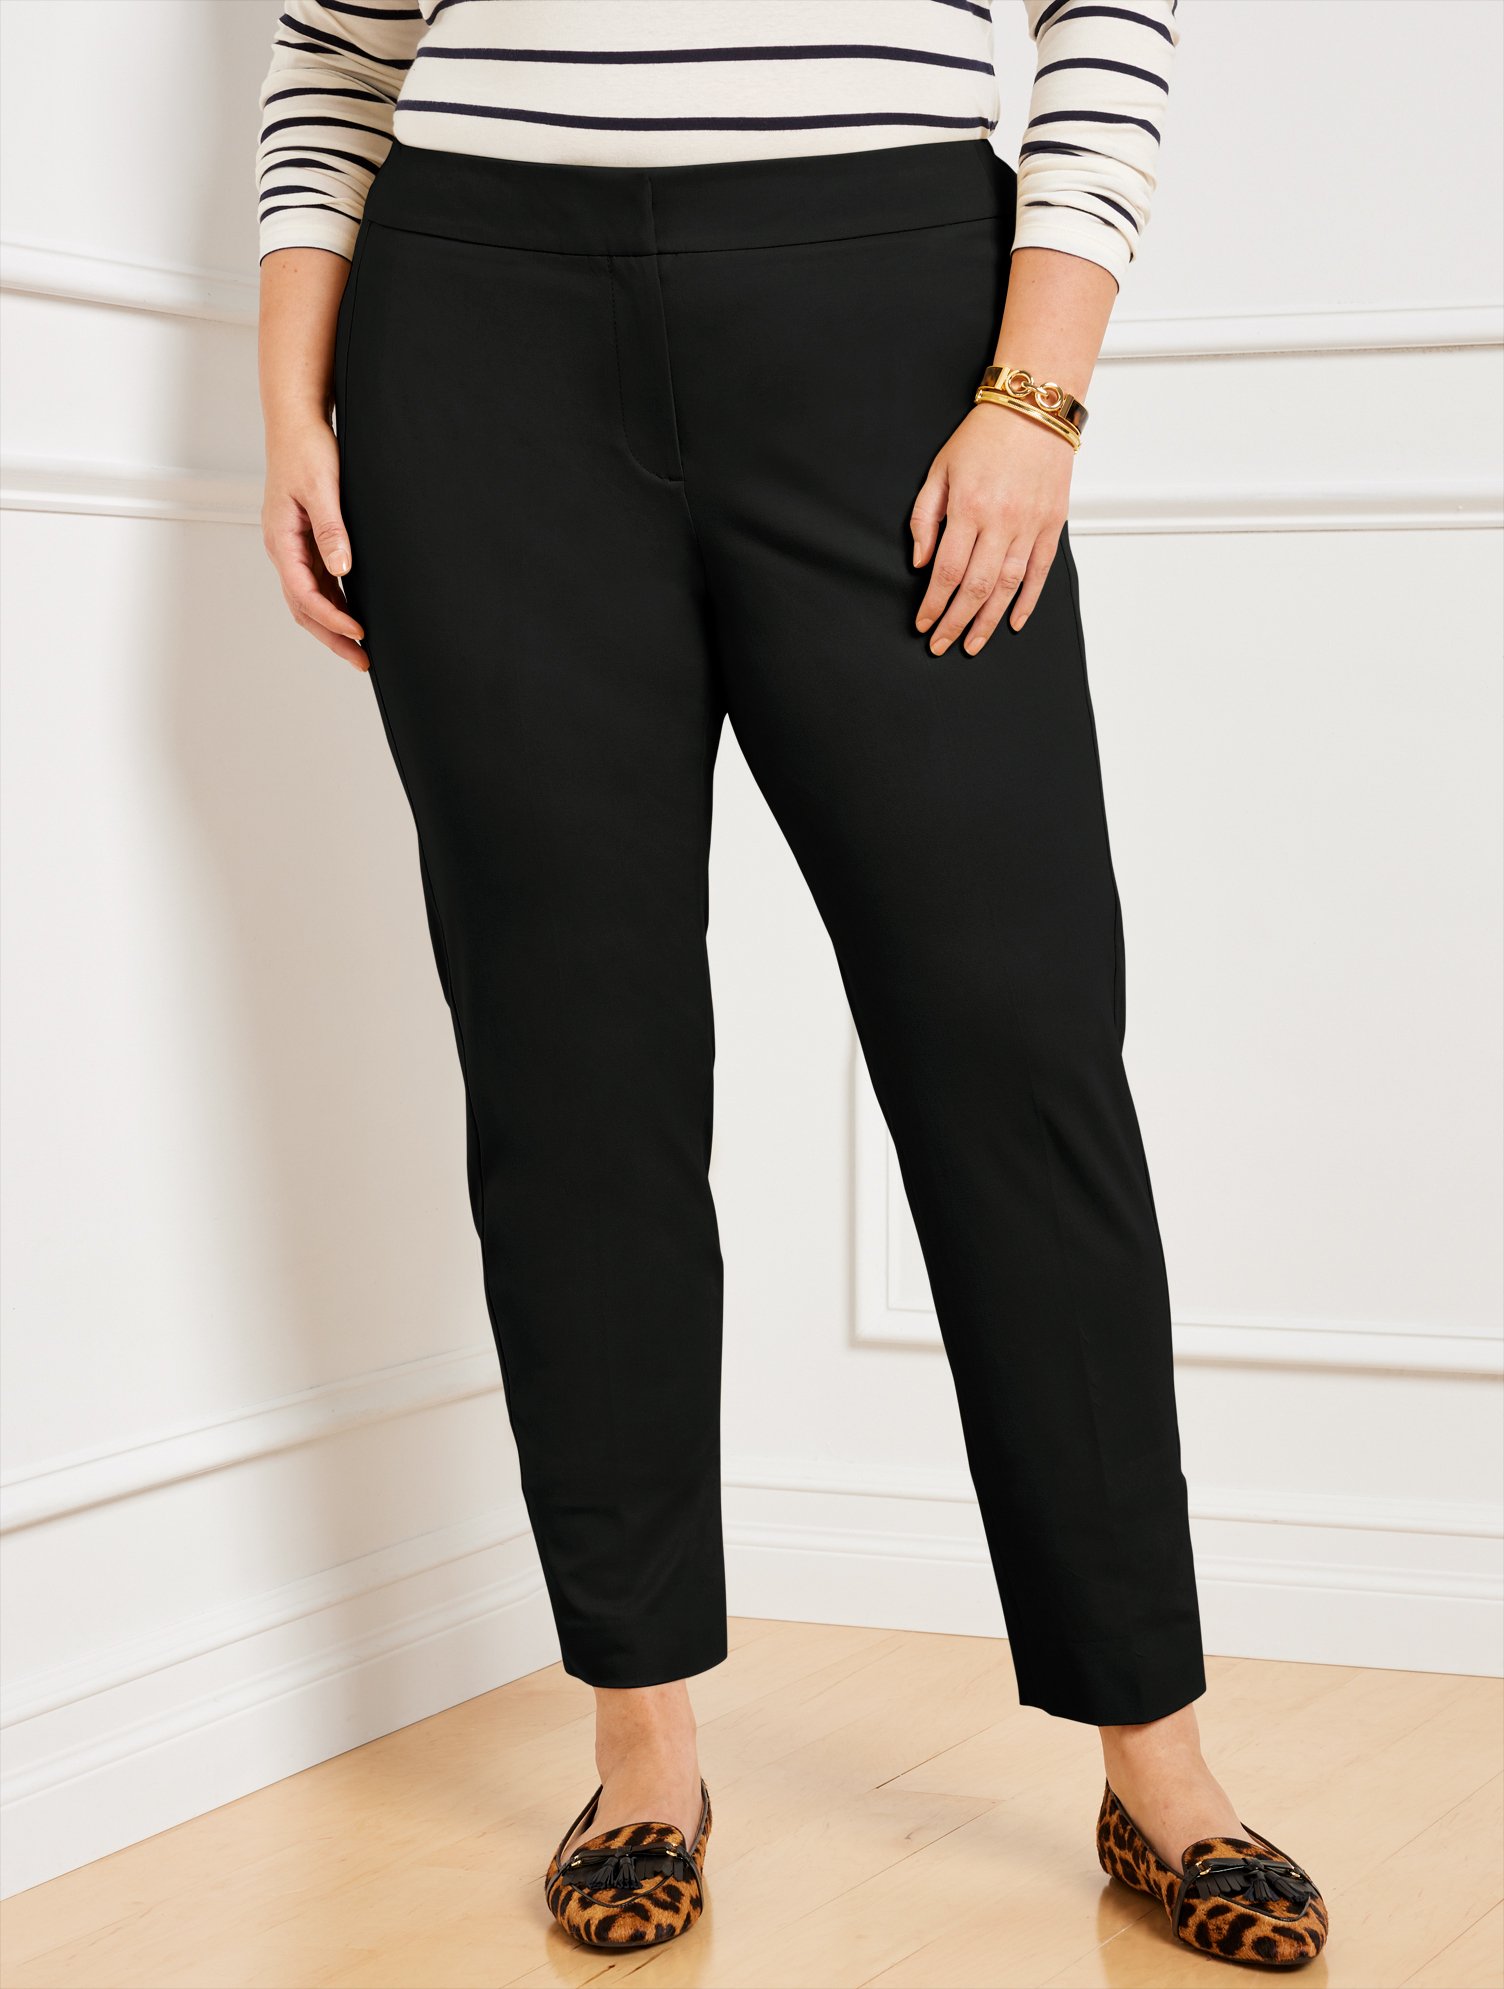 Plus Exclusive Talbots Chatham Ankle Pants - Sharkskin